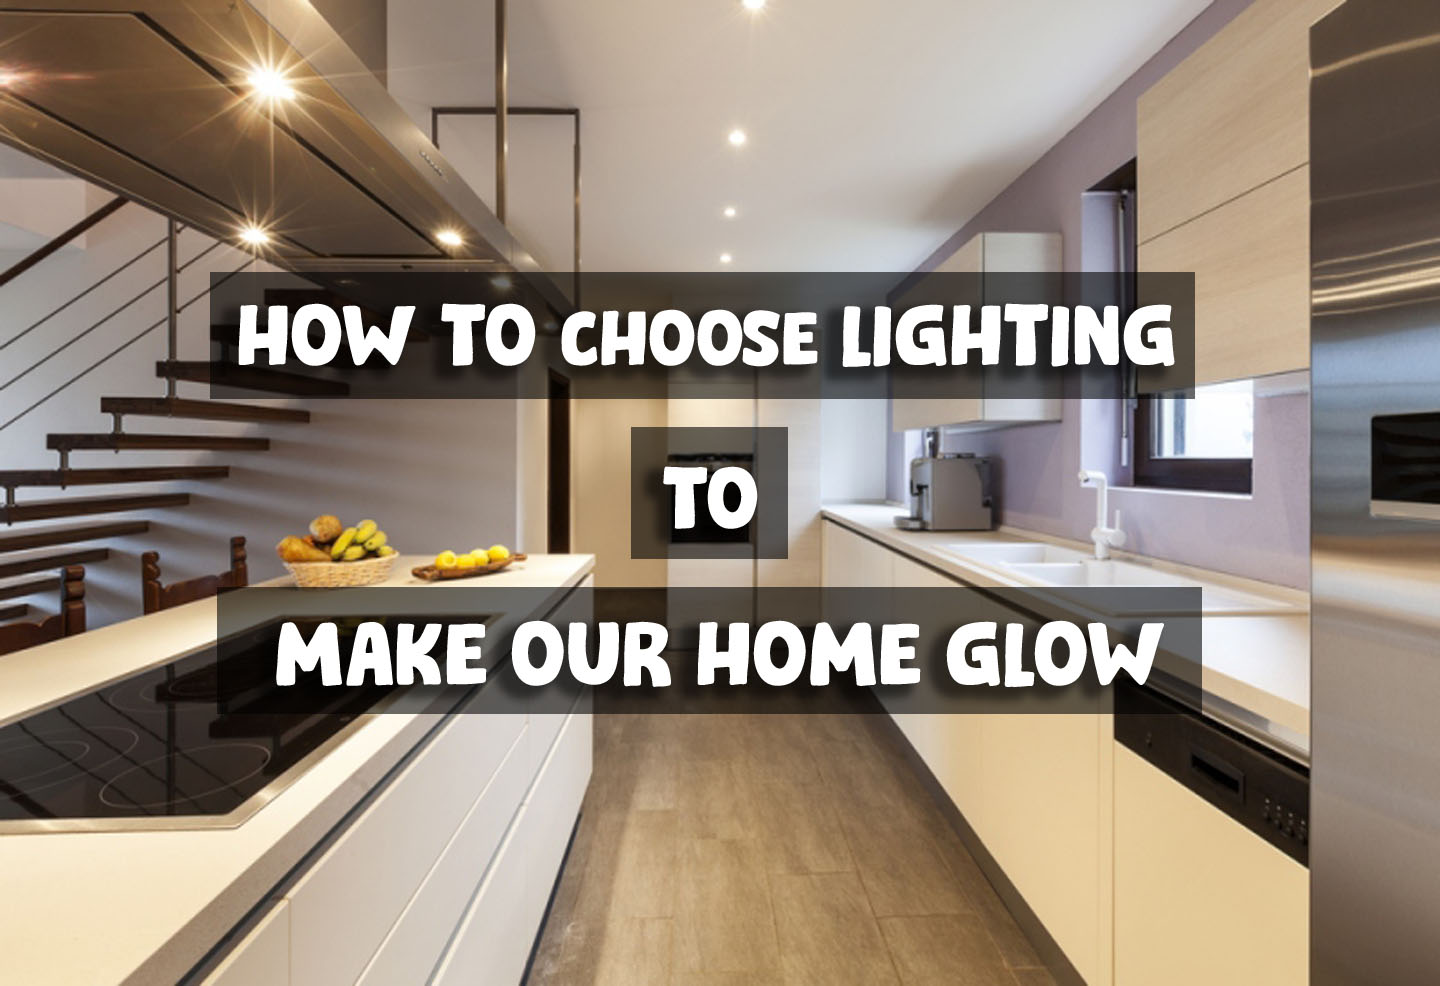 How to Choose Lighting to Make Our Home Glow